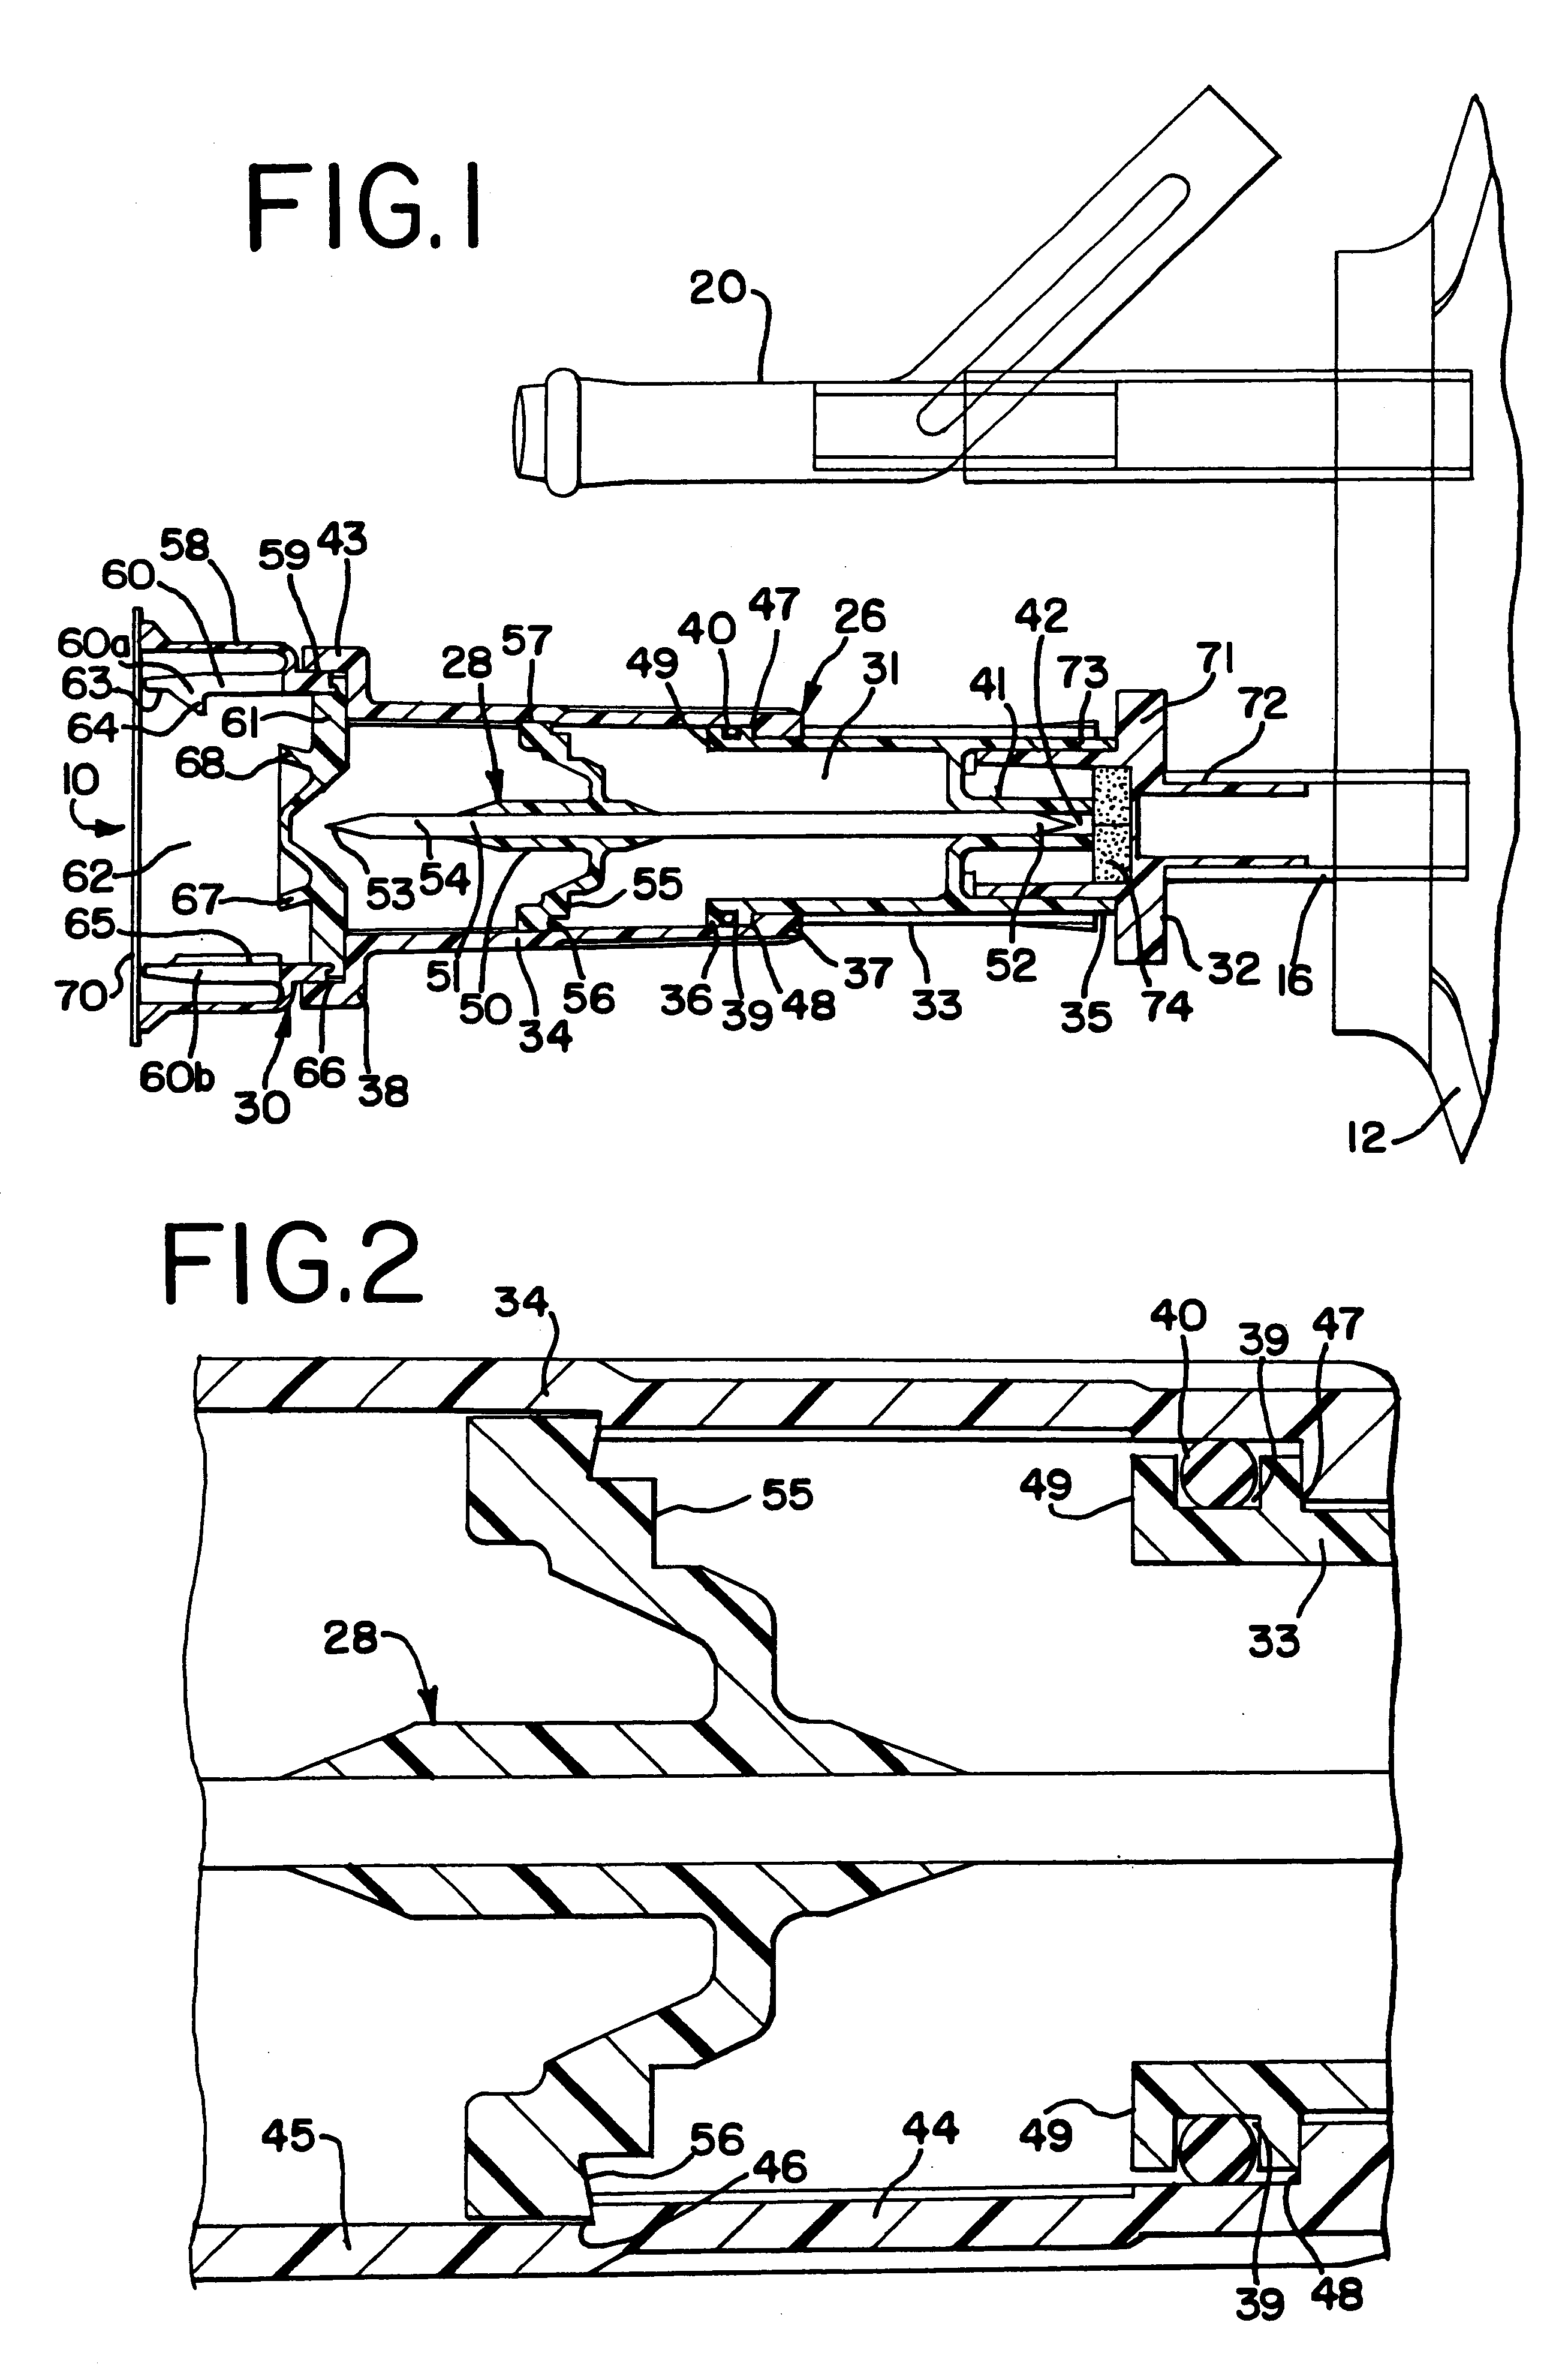 Vial connecting device for a sliding reconstitution device for a diluent container